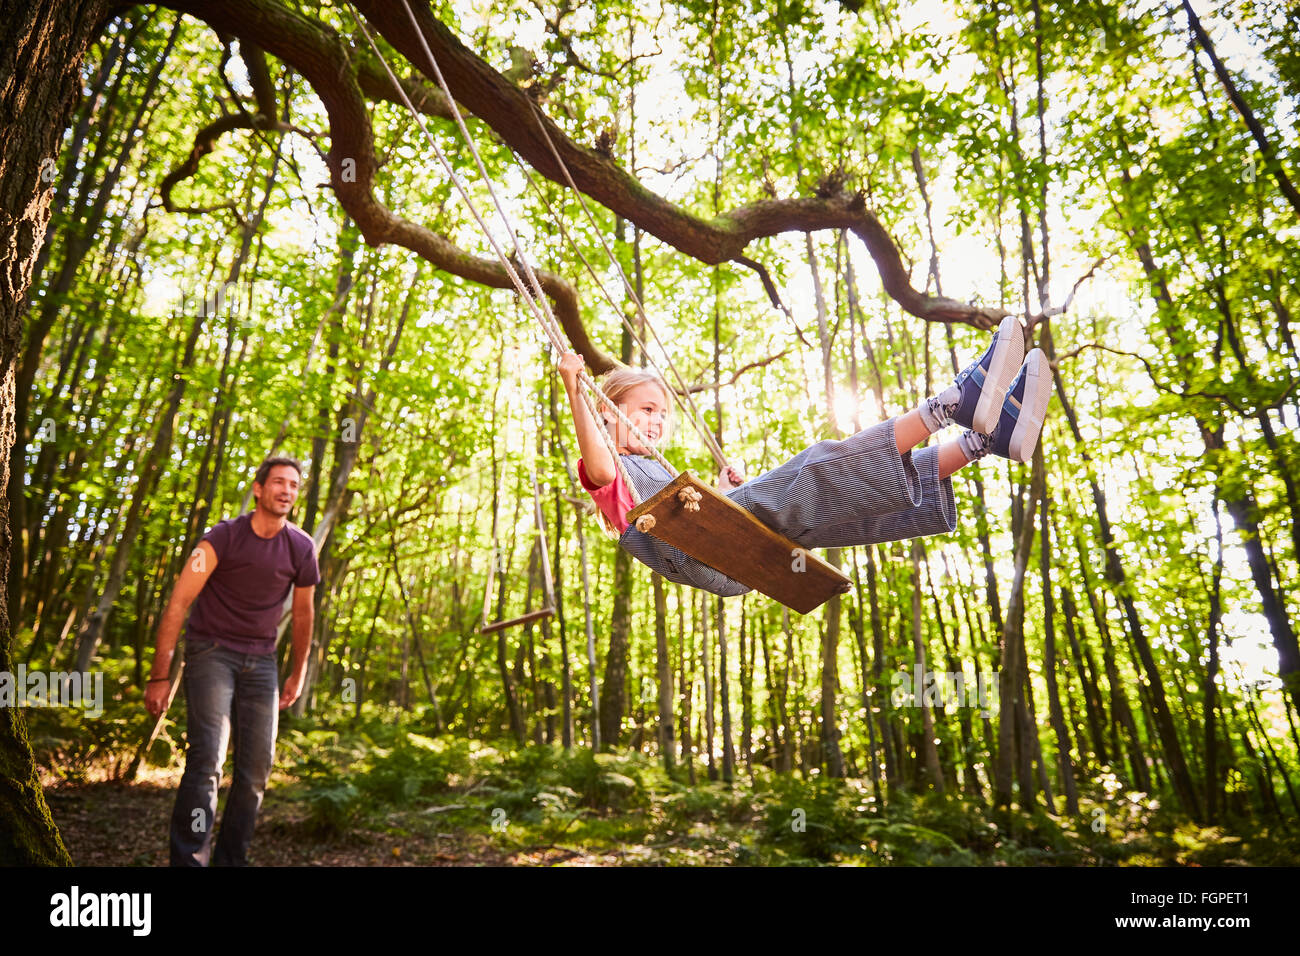 Father pushing daughter on rope swing in forest Stock Photo